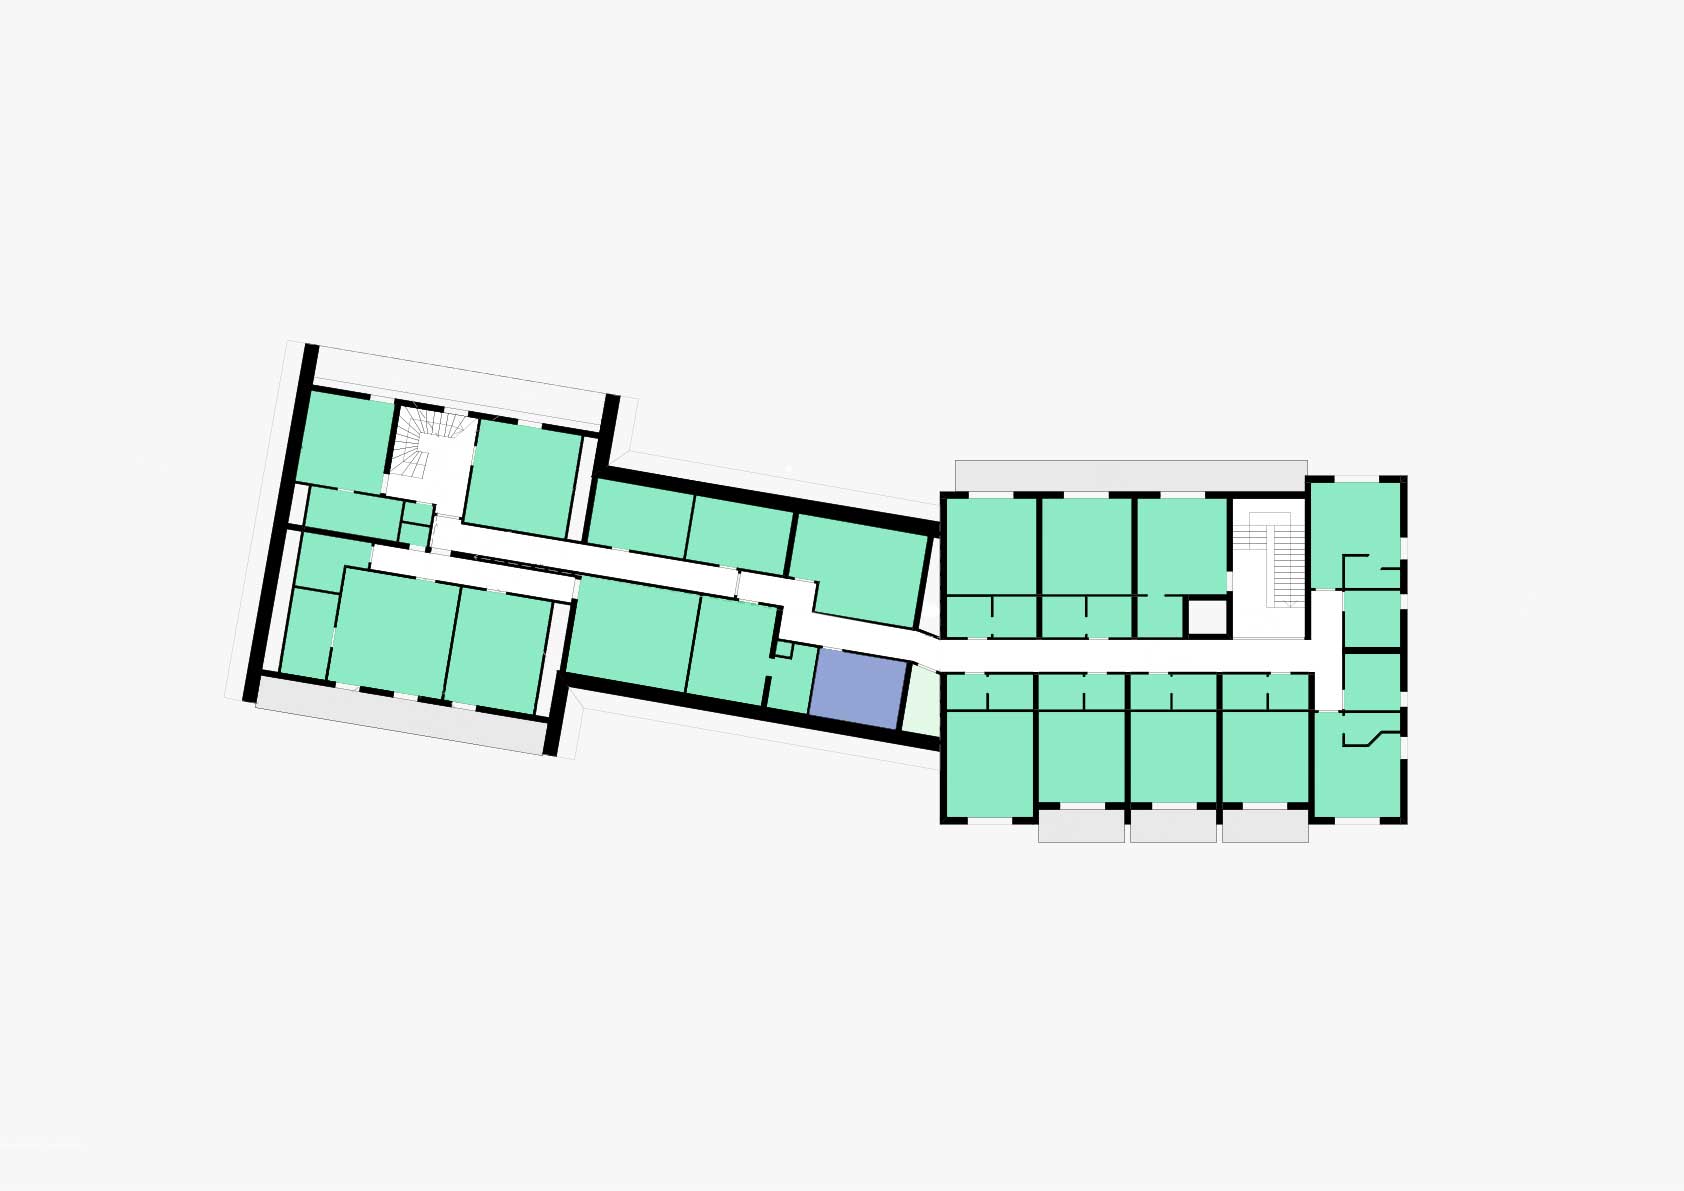 This graphic shows the use and layout of the Hotel Carinth in the Lungau.